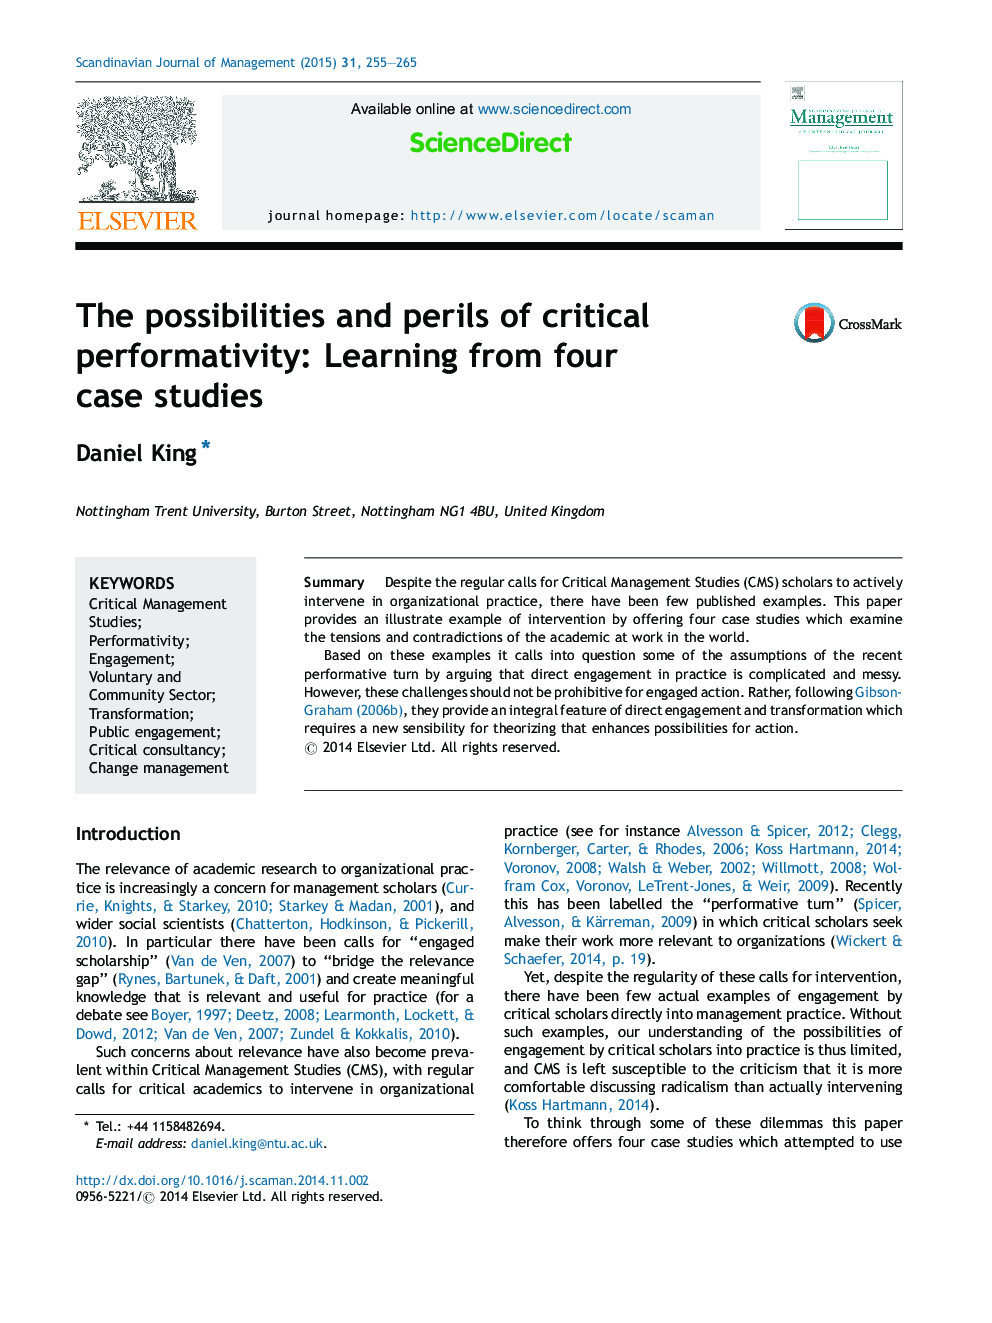 The possibilities and perils of critical performativity: Learning from four case studies